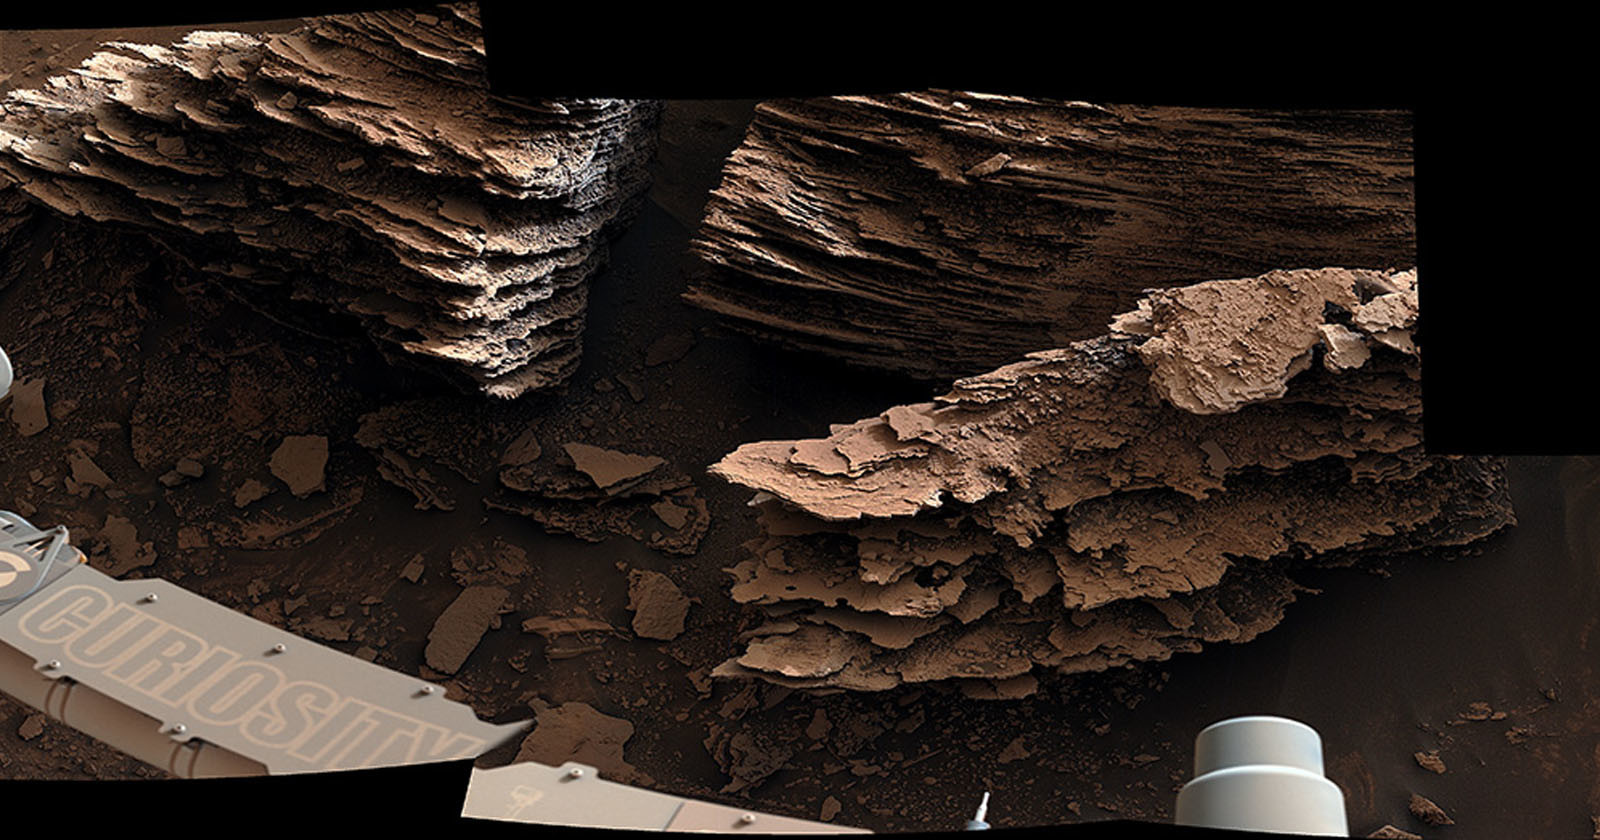  curiosity rover captures flaky rocks mars from past 